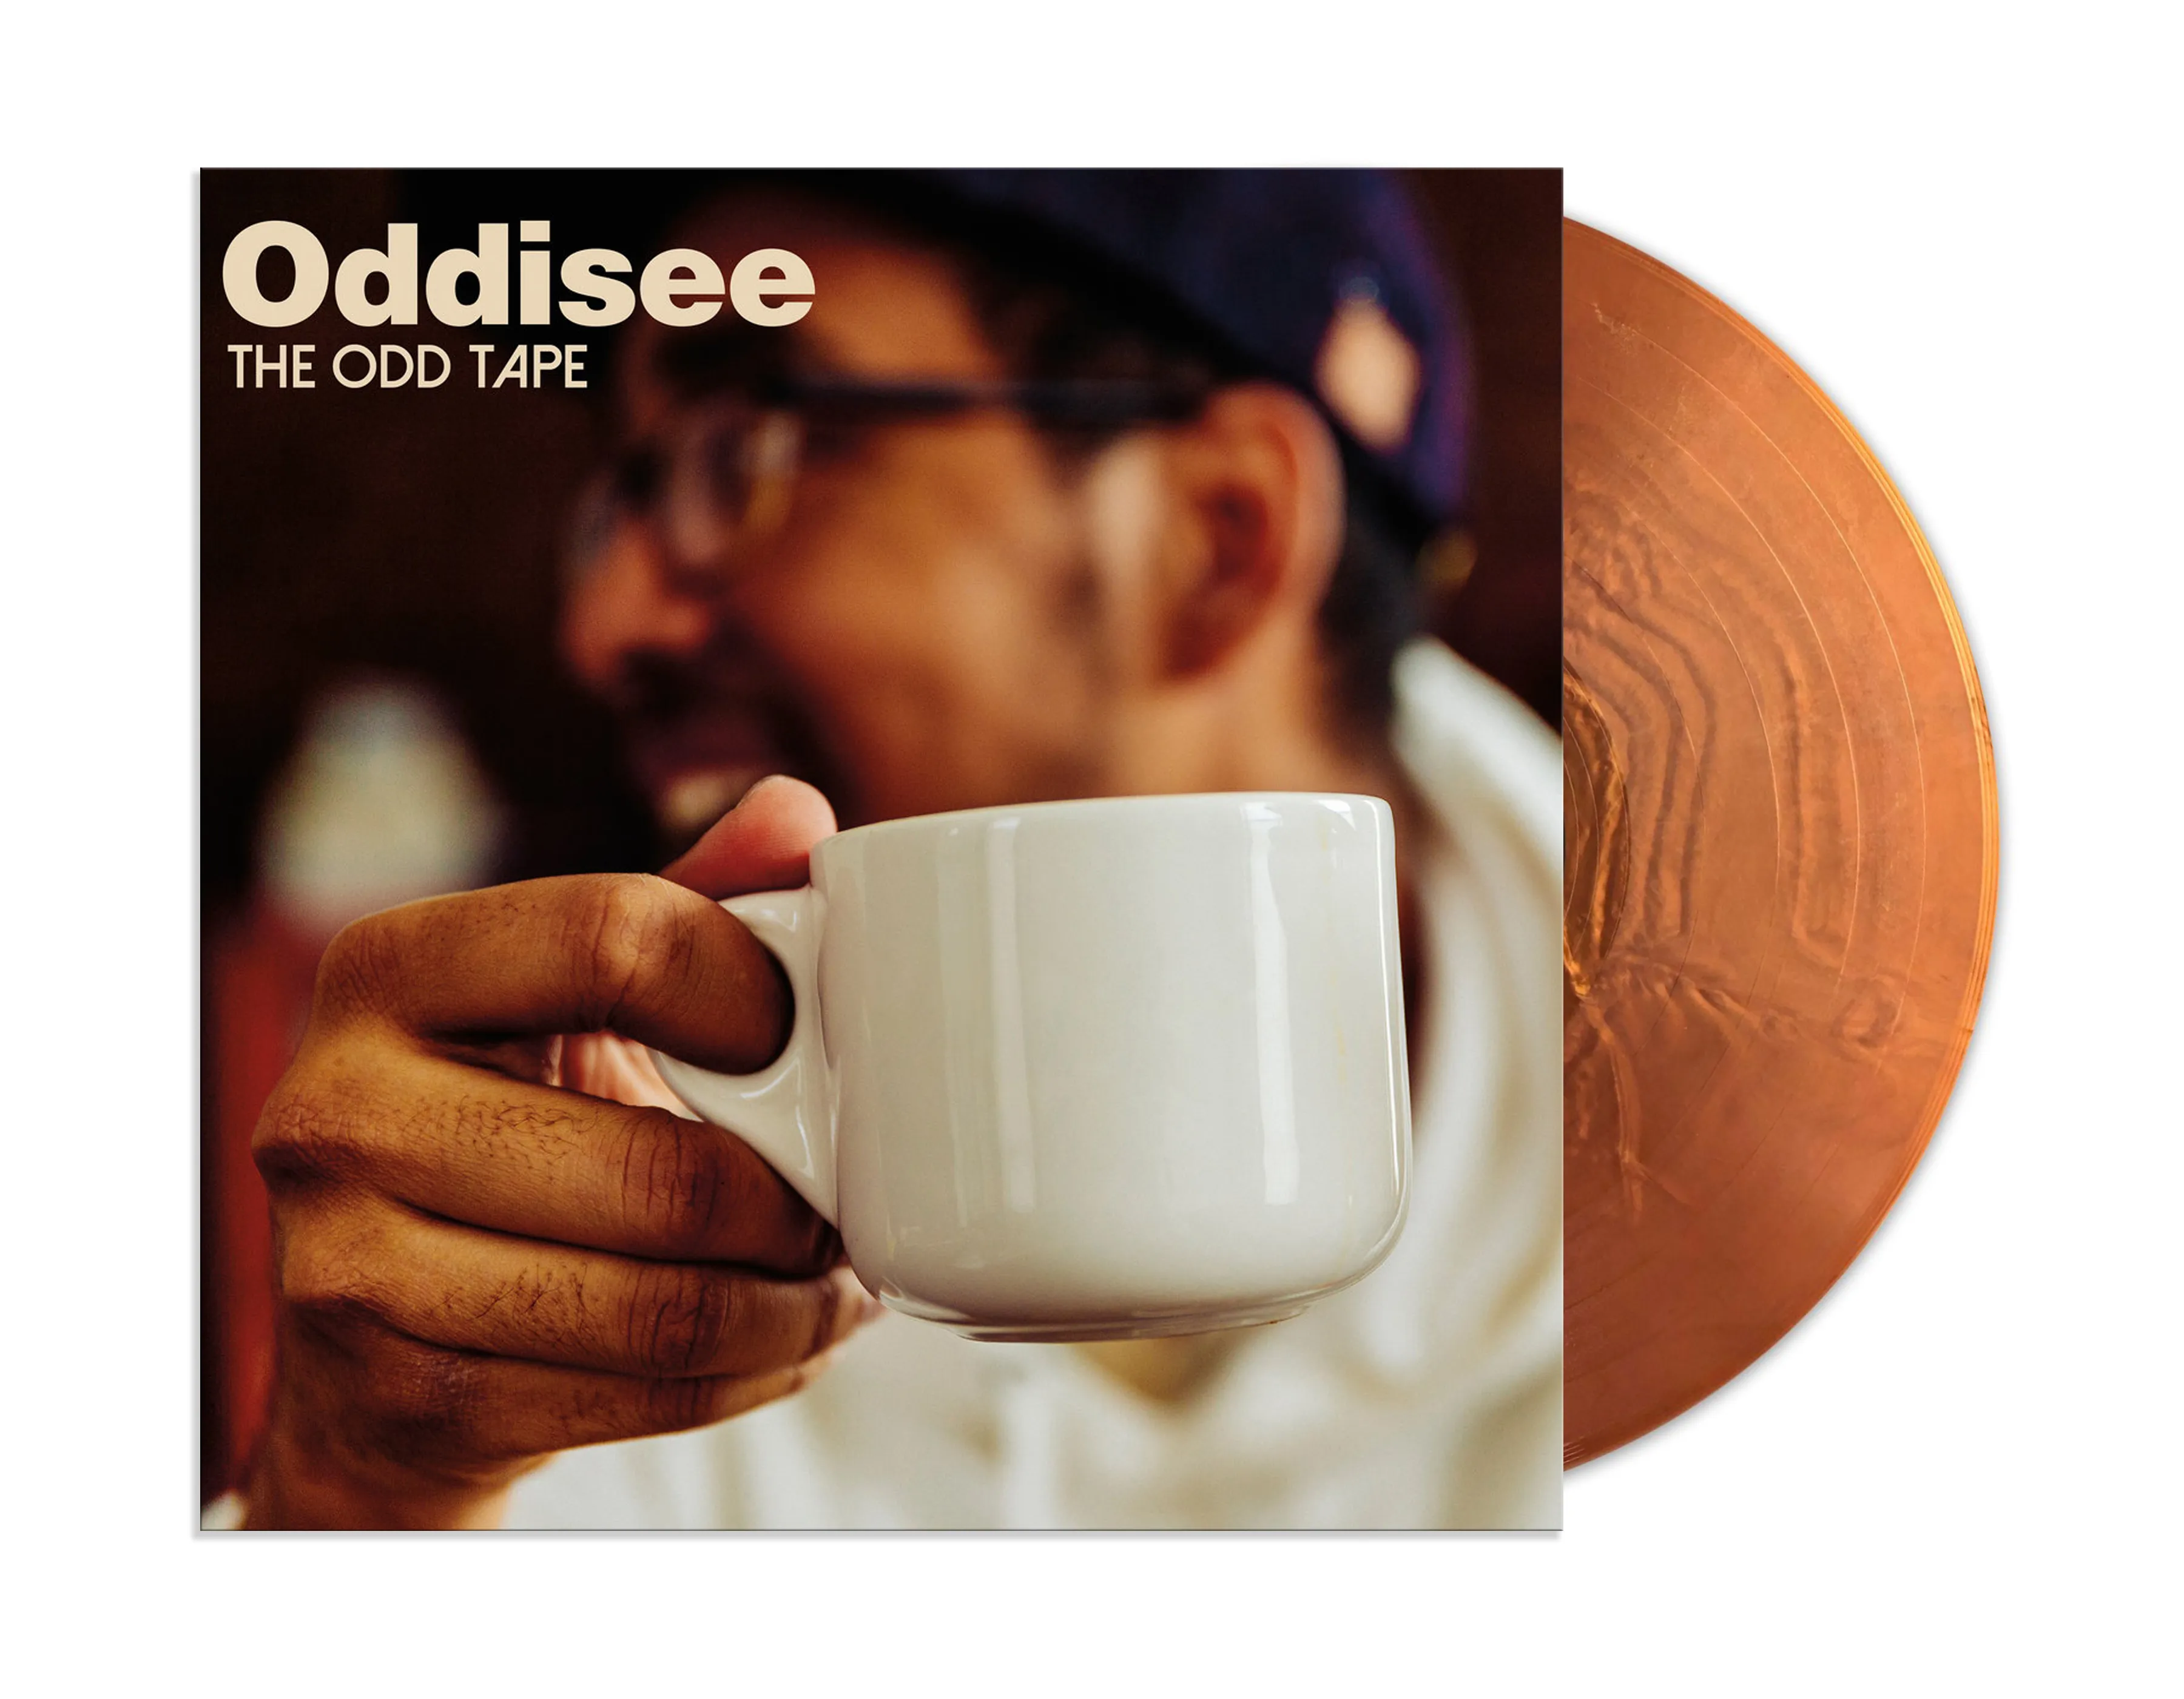 Oddisee - The Odd Tape [Indie Exclusive Limited Edition Metallic 